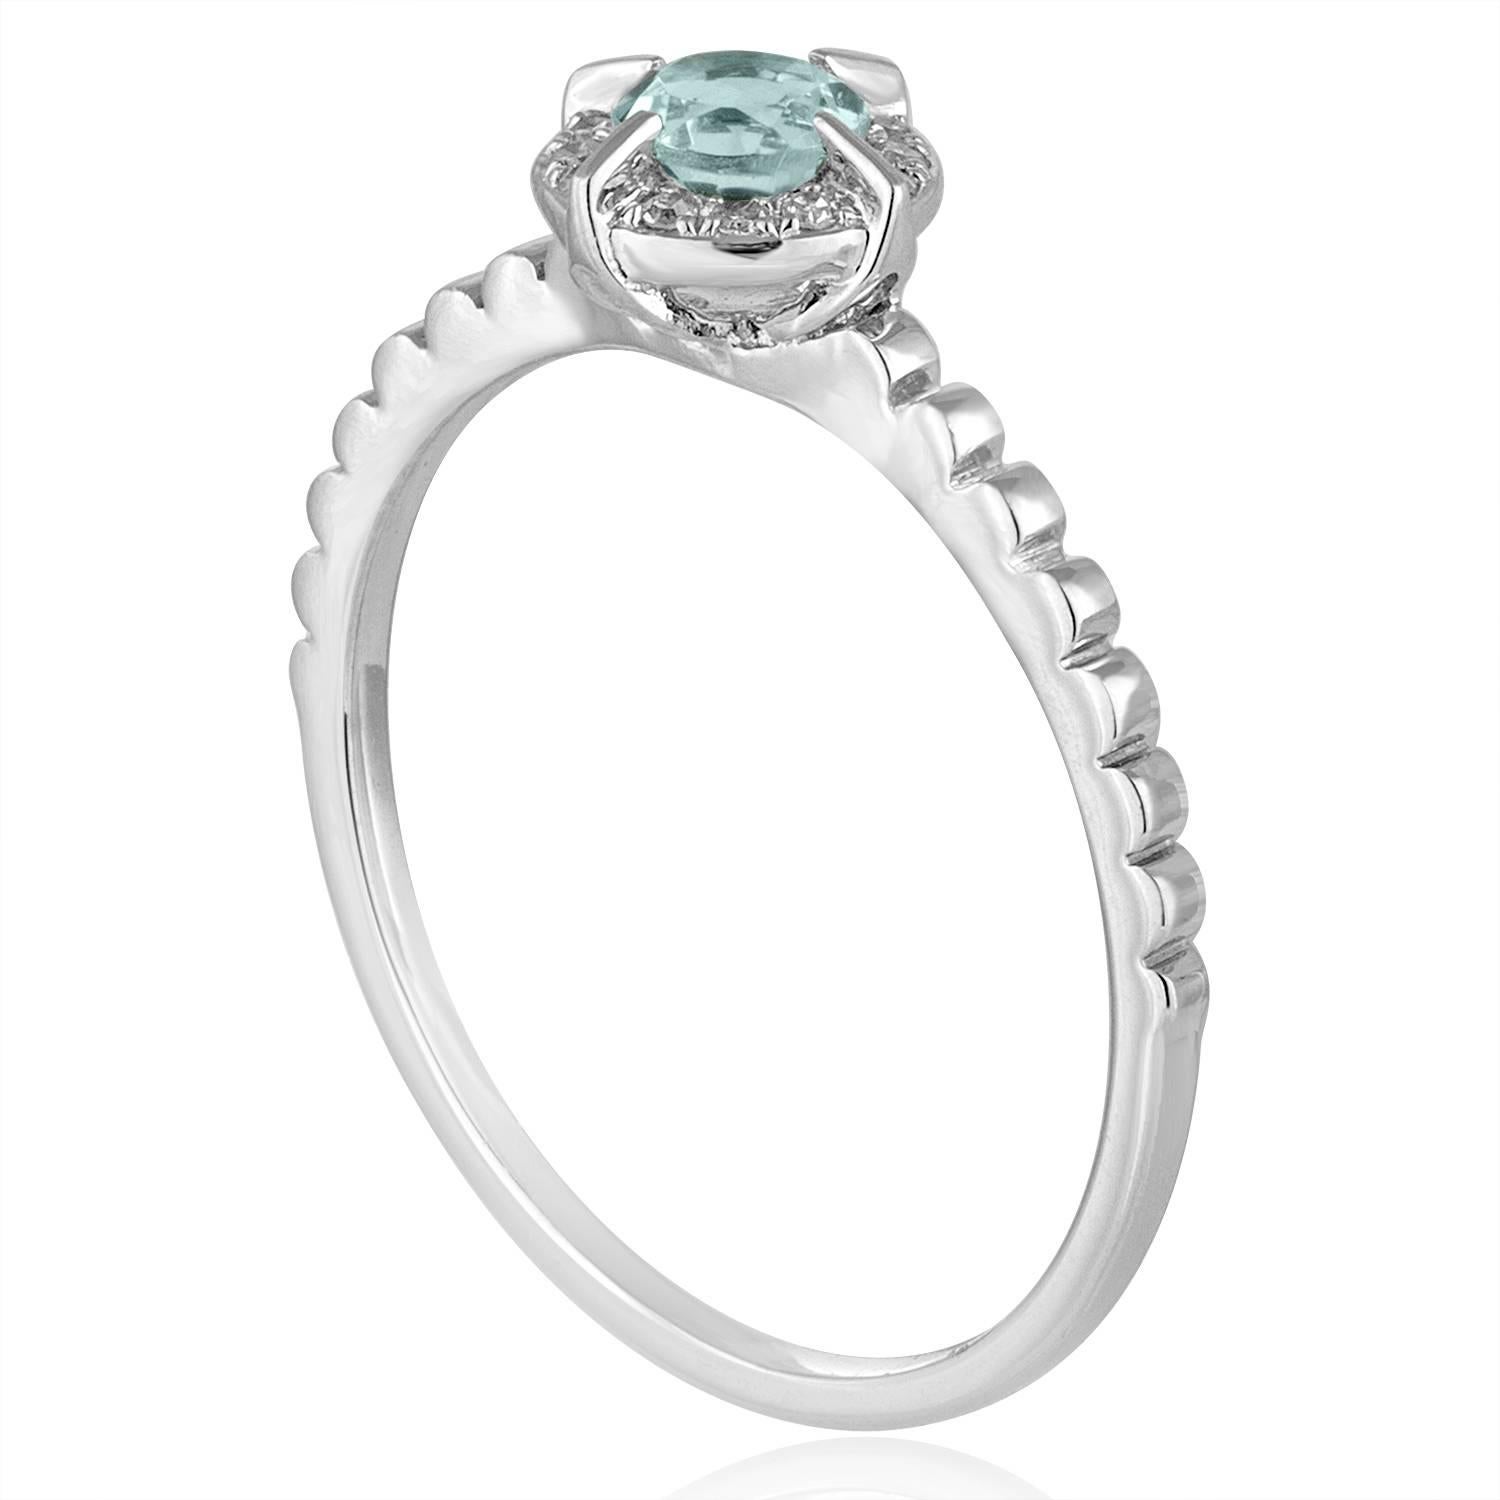 Stackable Blue Topaz Ring
The ring is 14K White Gold
There are 0.04 Carats In Diamonds H SI
The Center Stone is Round 0.34 Carats Blue Topaz
The top measures 1/4